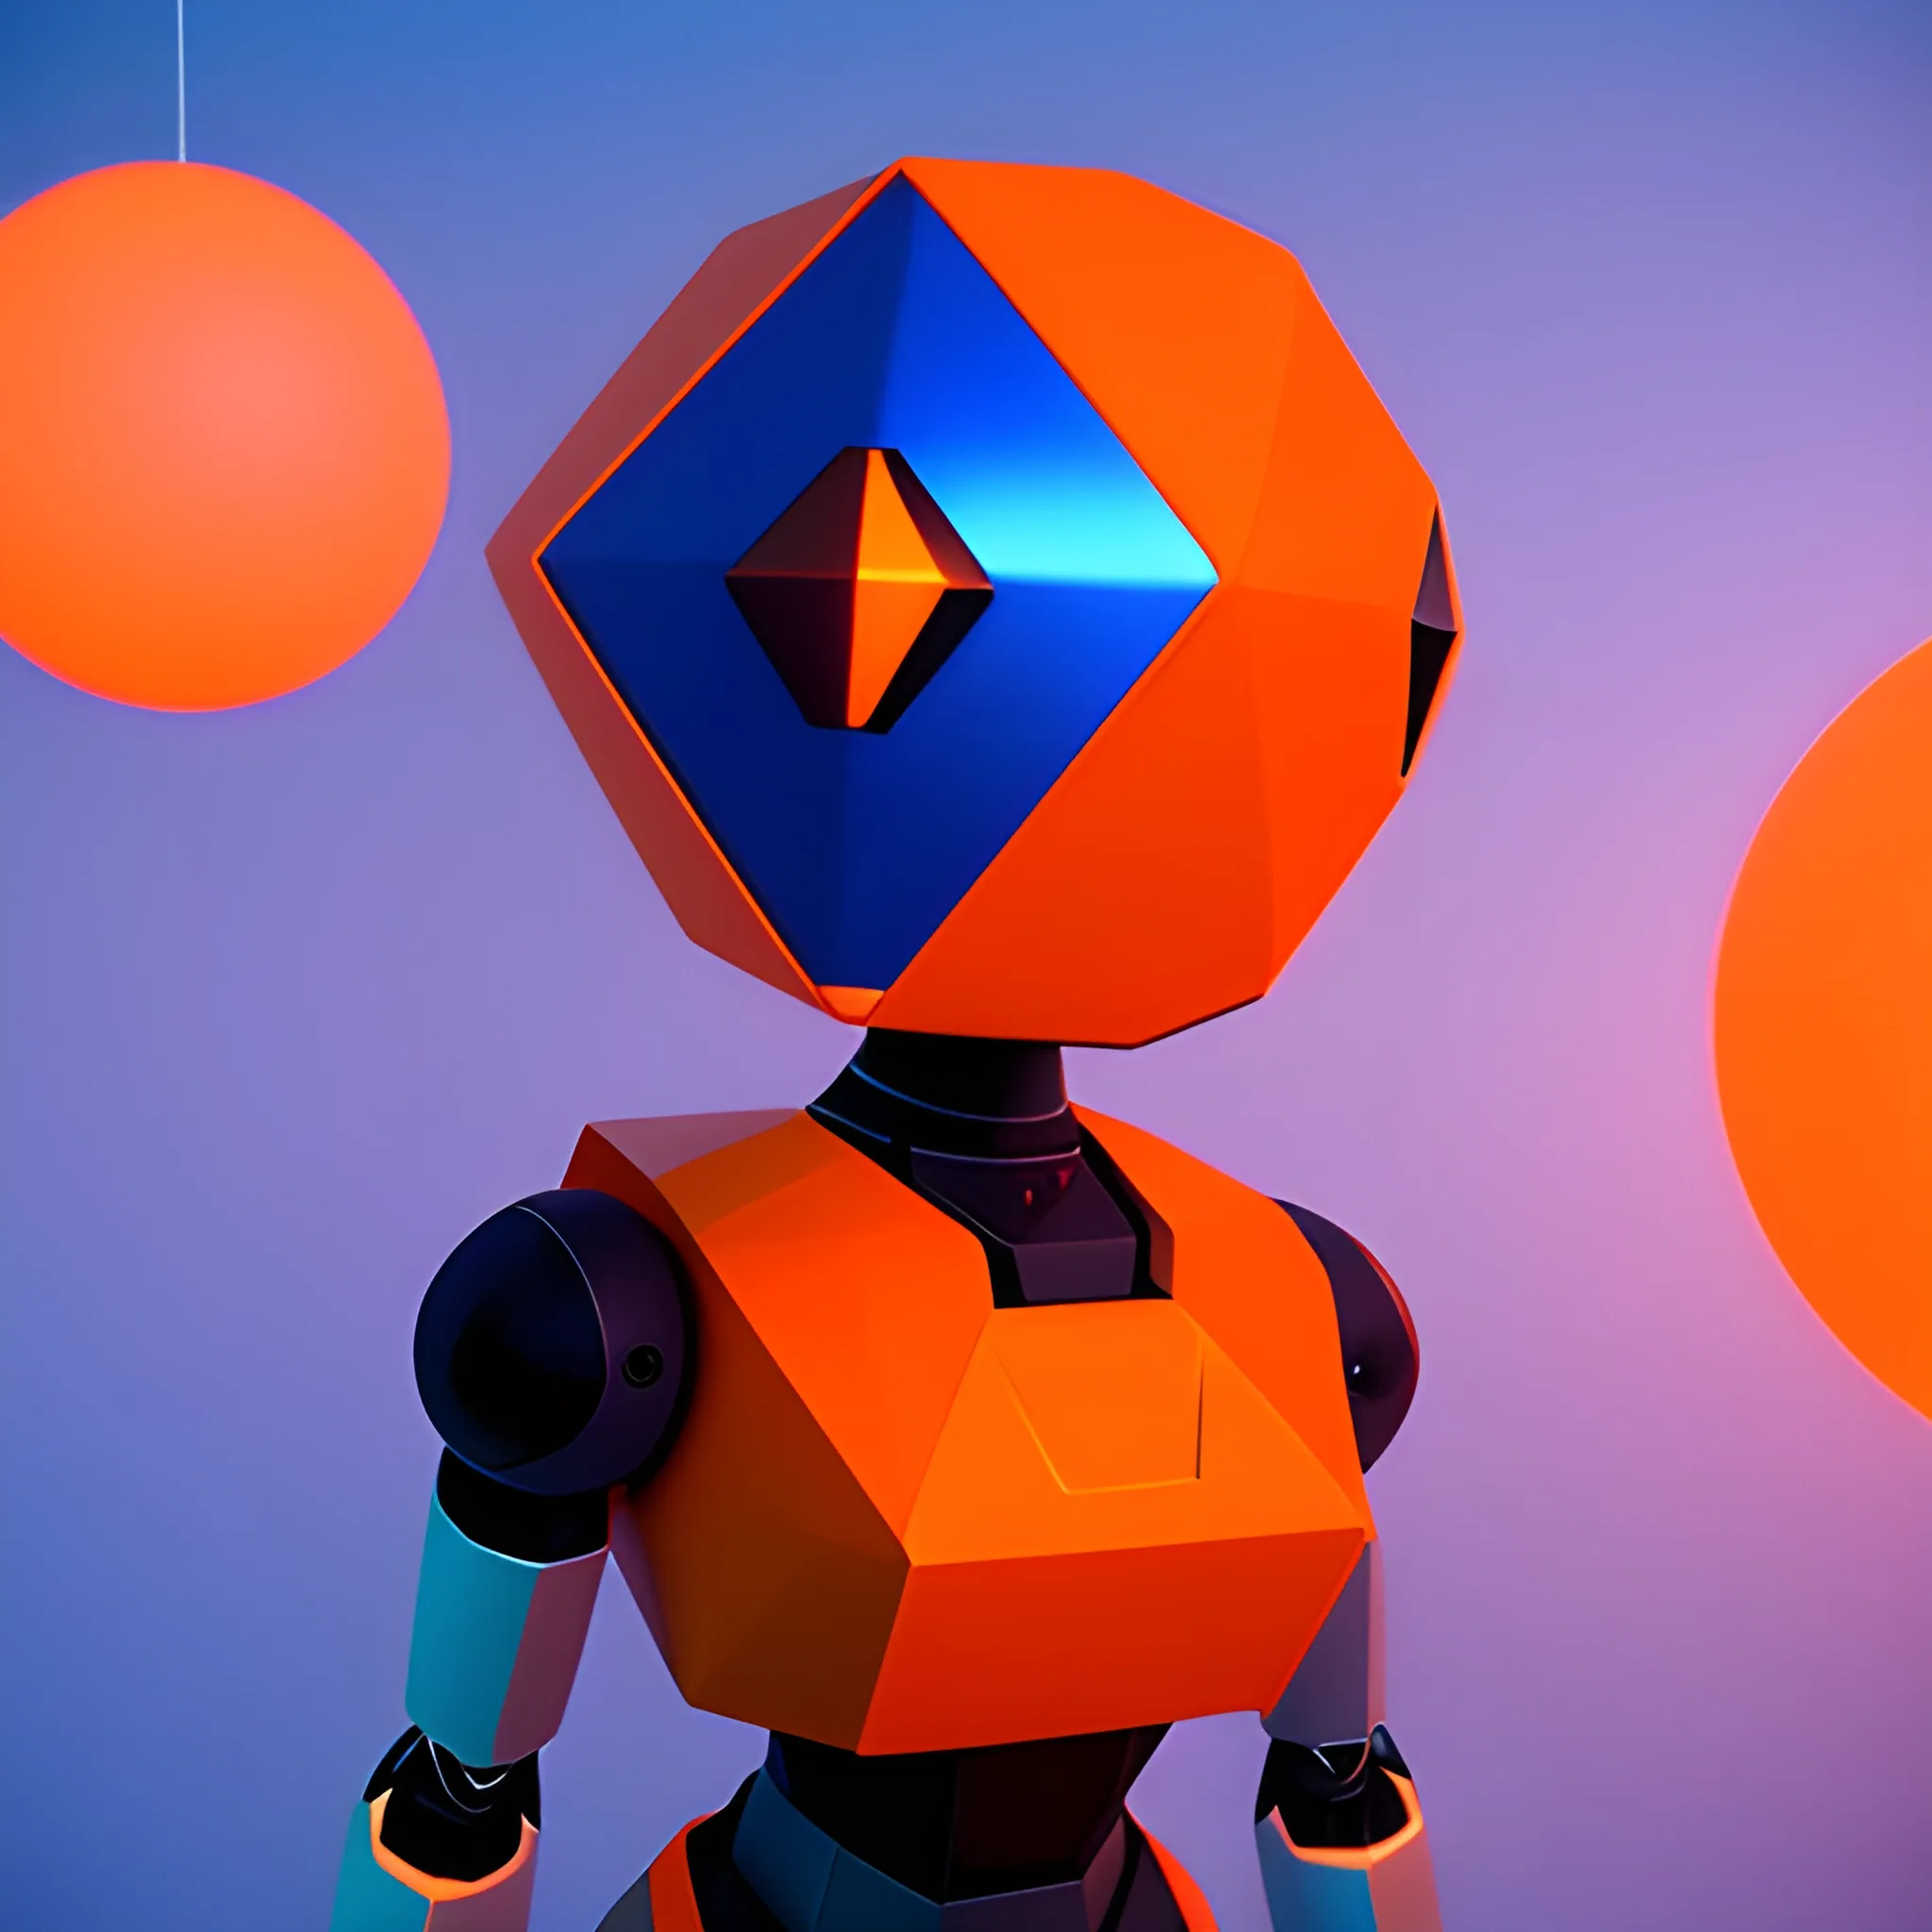 in a low poly virtual world, with orange spheres in the background, in the foreground a small welcoming robot, aligned to the right of the image, taking up only a third of the image, with blue monitor lighting.